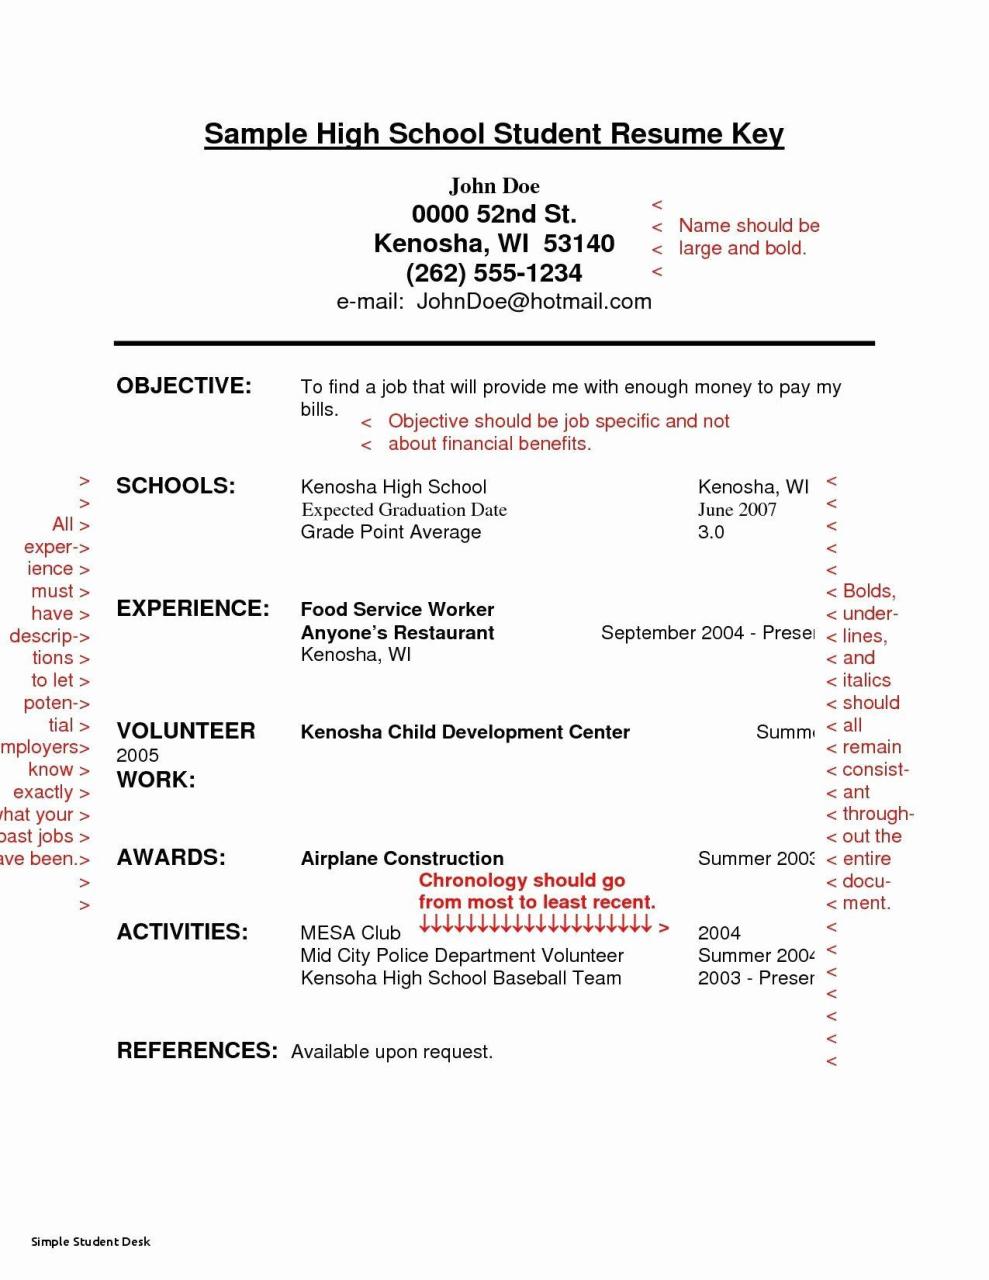 Should I Put Expected Graduation Date On Resume